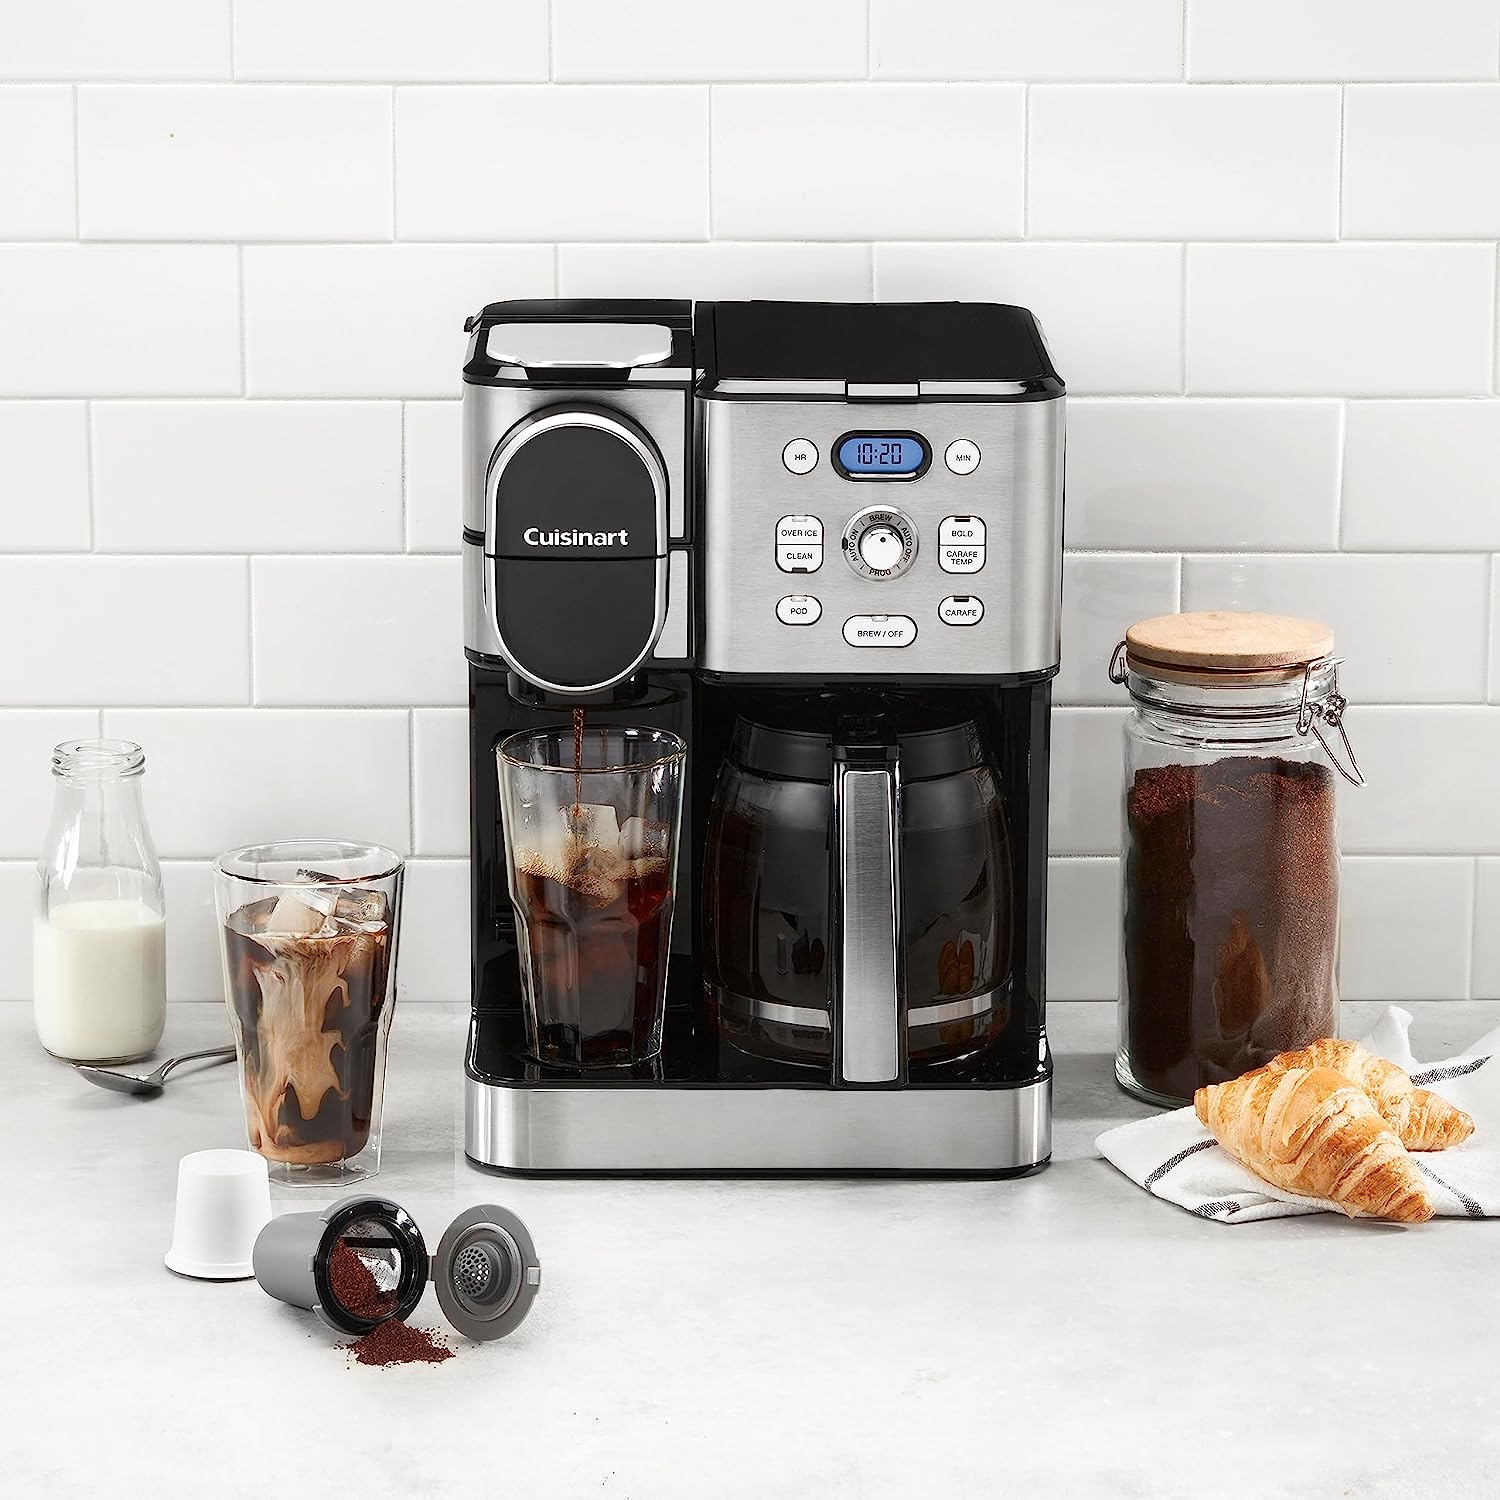 Cuisinart Coffee Maker Review